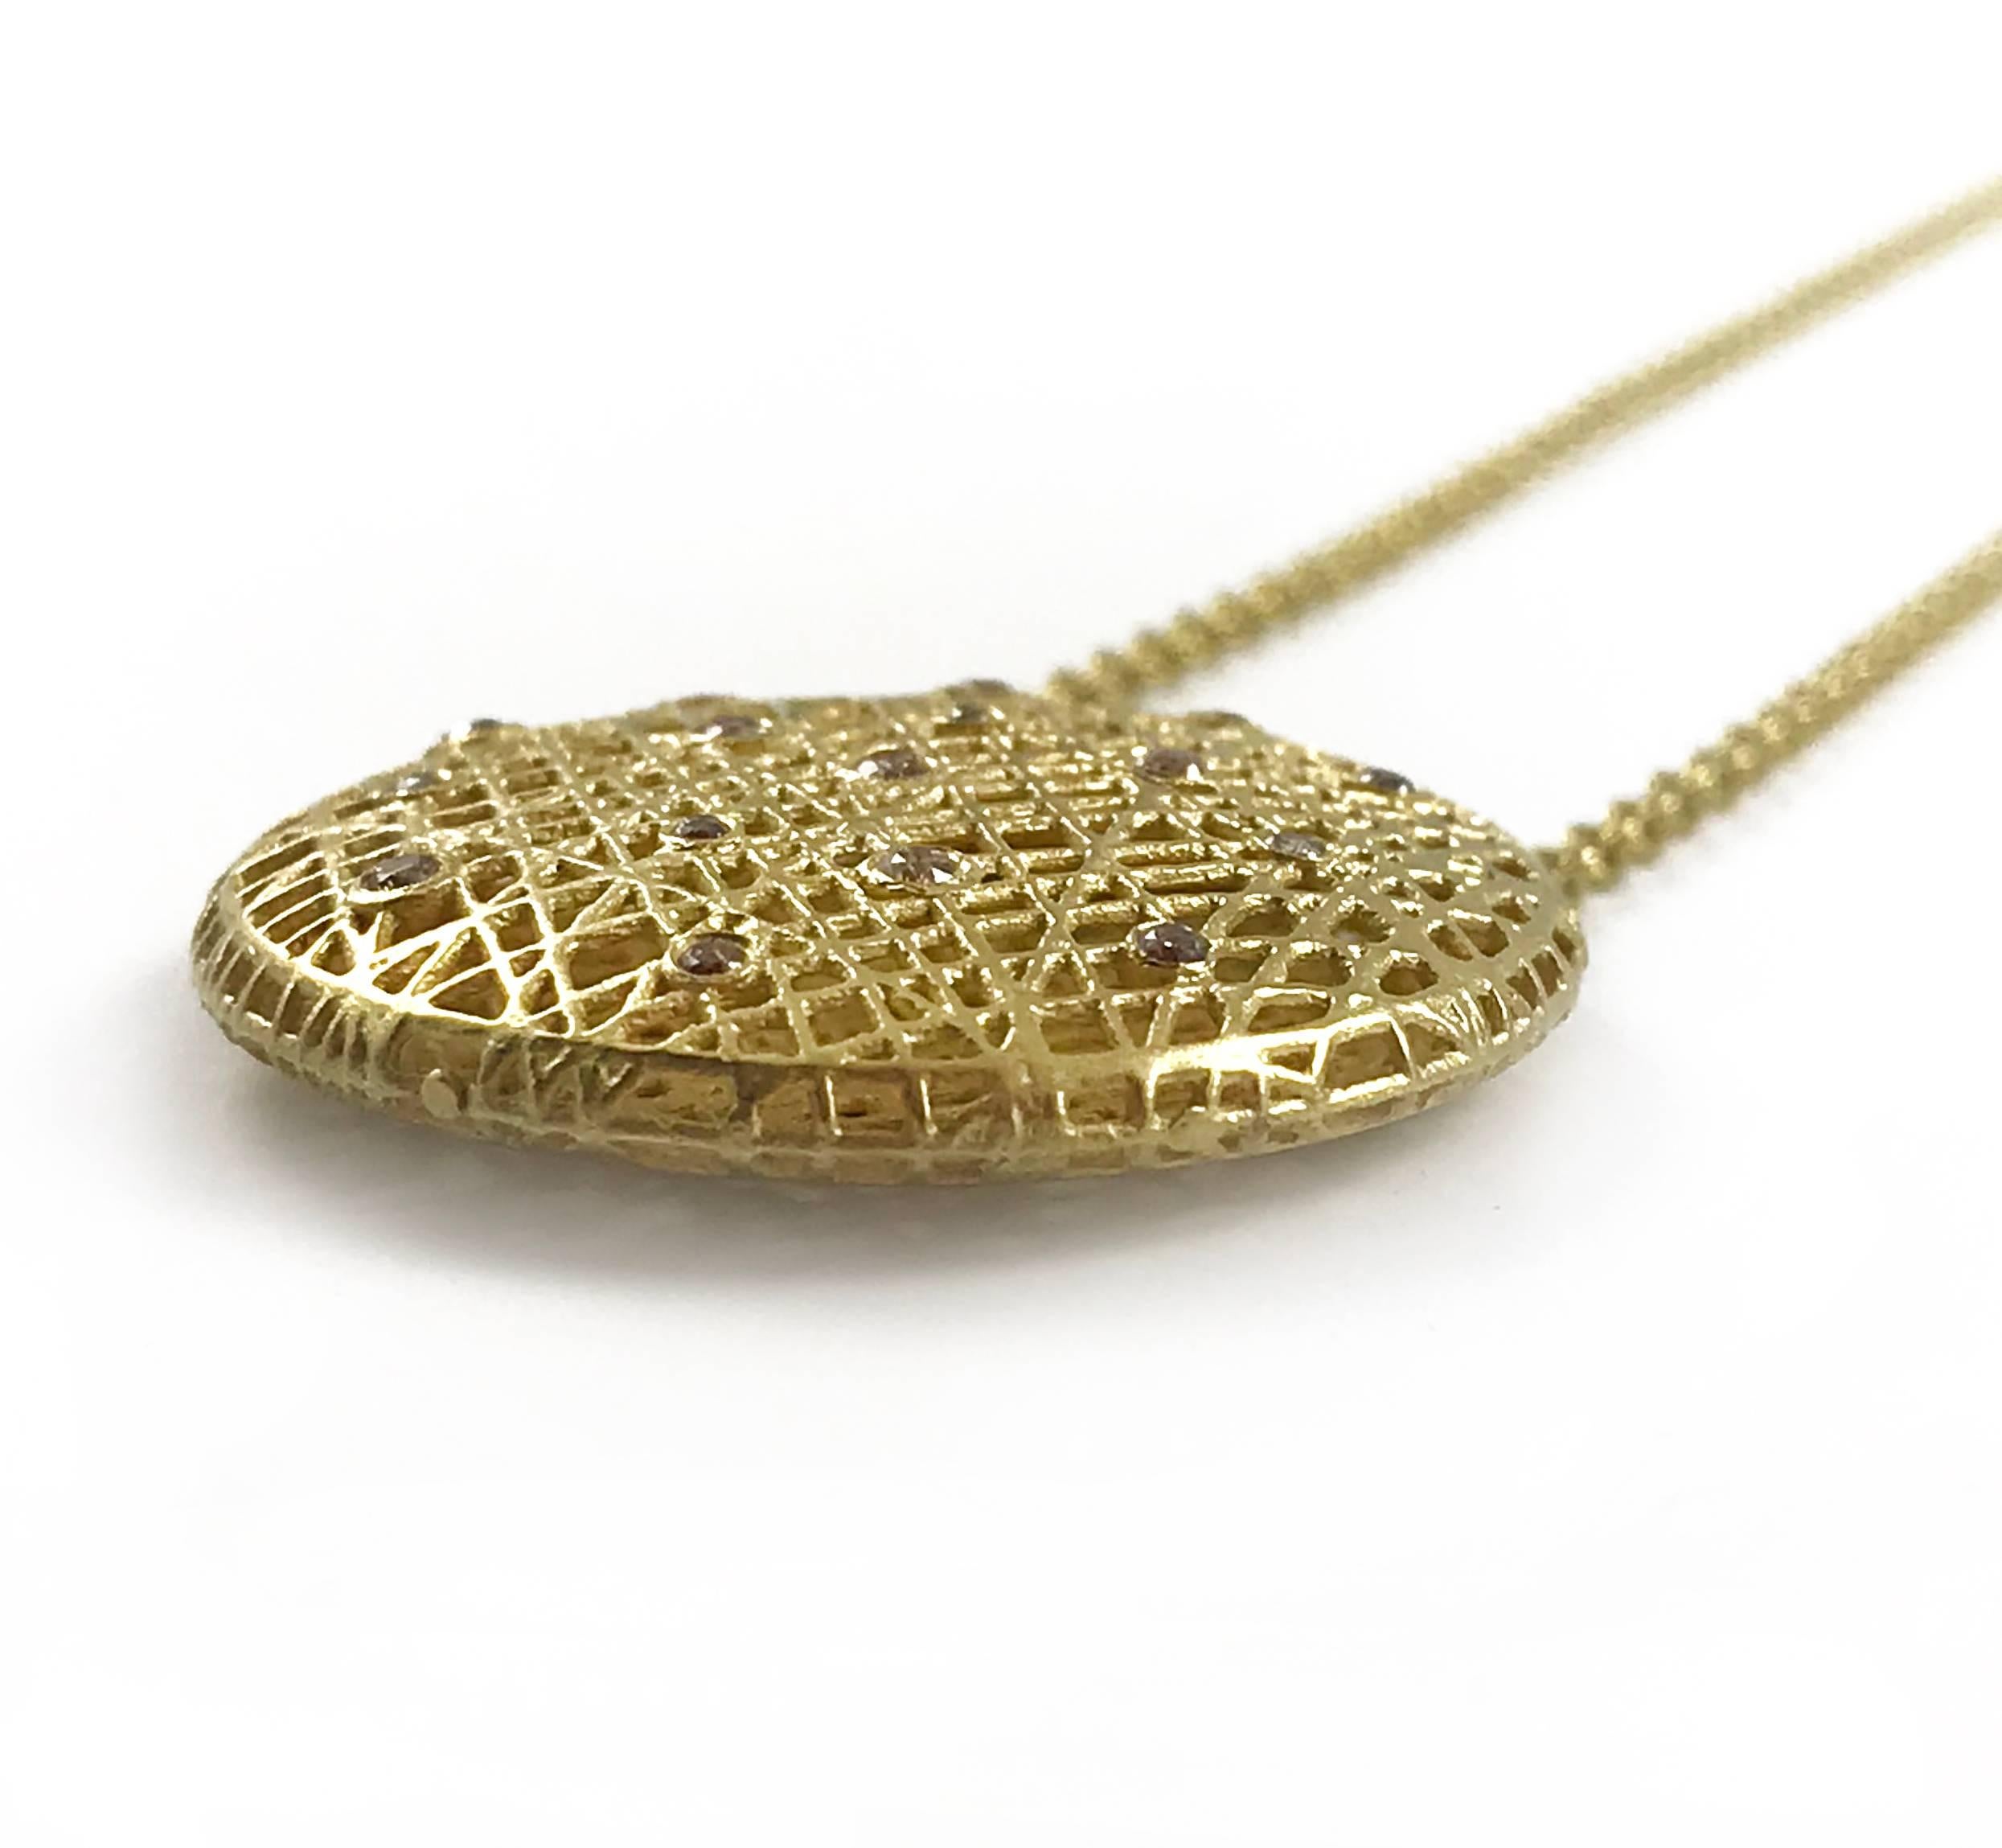 Yossi Harari 18 Karat Yellow Gold Lace Pendant Necklace, the pendant is approximately 1